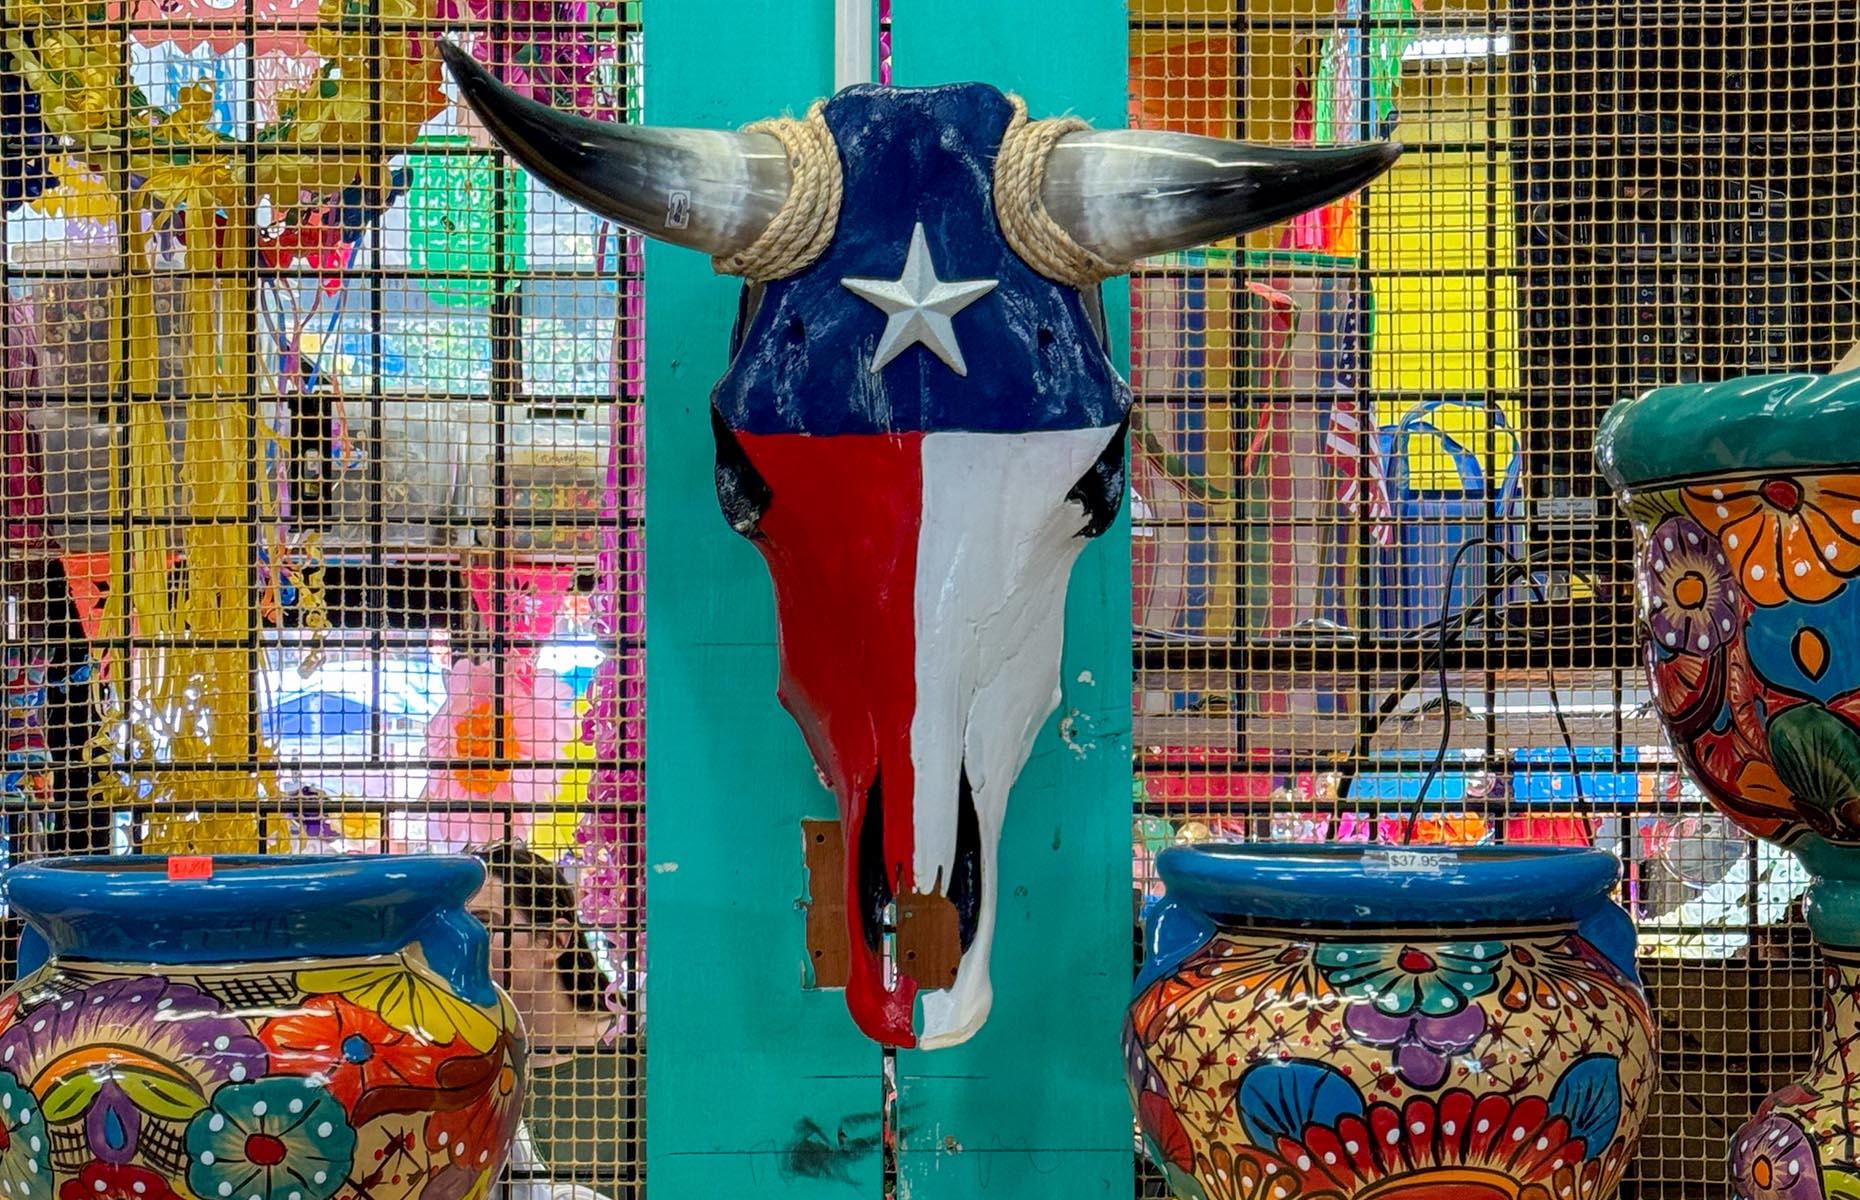 <p>Historic Market Square is where the culture of San Antonio comes alive. Here you can immerse yourself in the sights and flavors of old Mexico as well as pick up a truly unique souvenir from the hundreds of vendors selling authentic Mexican curios and artifacts, hand-crafted leather goods, and a diverse collection of other cultural apparel.</p>  <p>On the weekends there is live entertainment too, with Mariachi bands turning the whole square into a mini fiesta.</p>